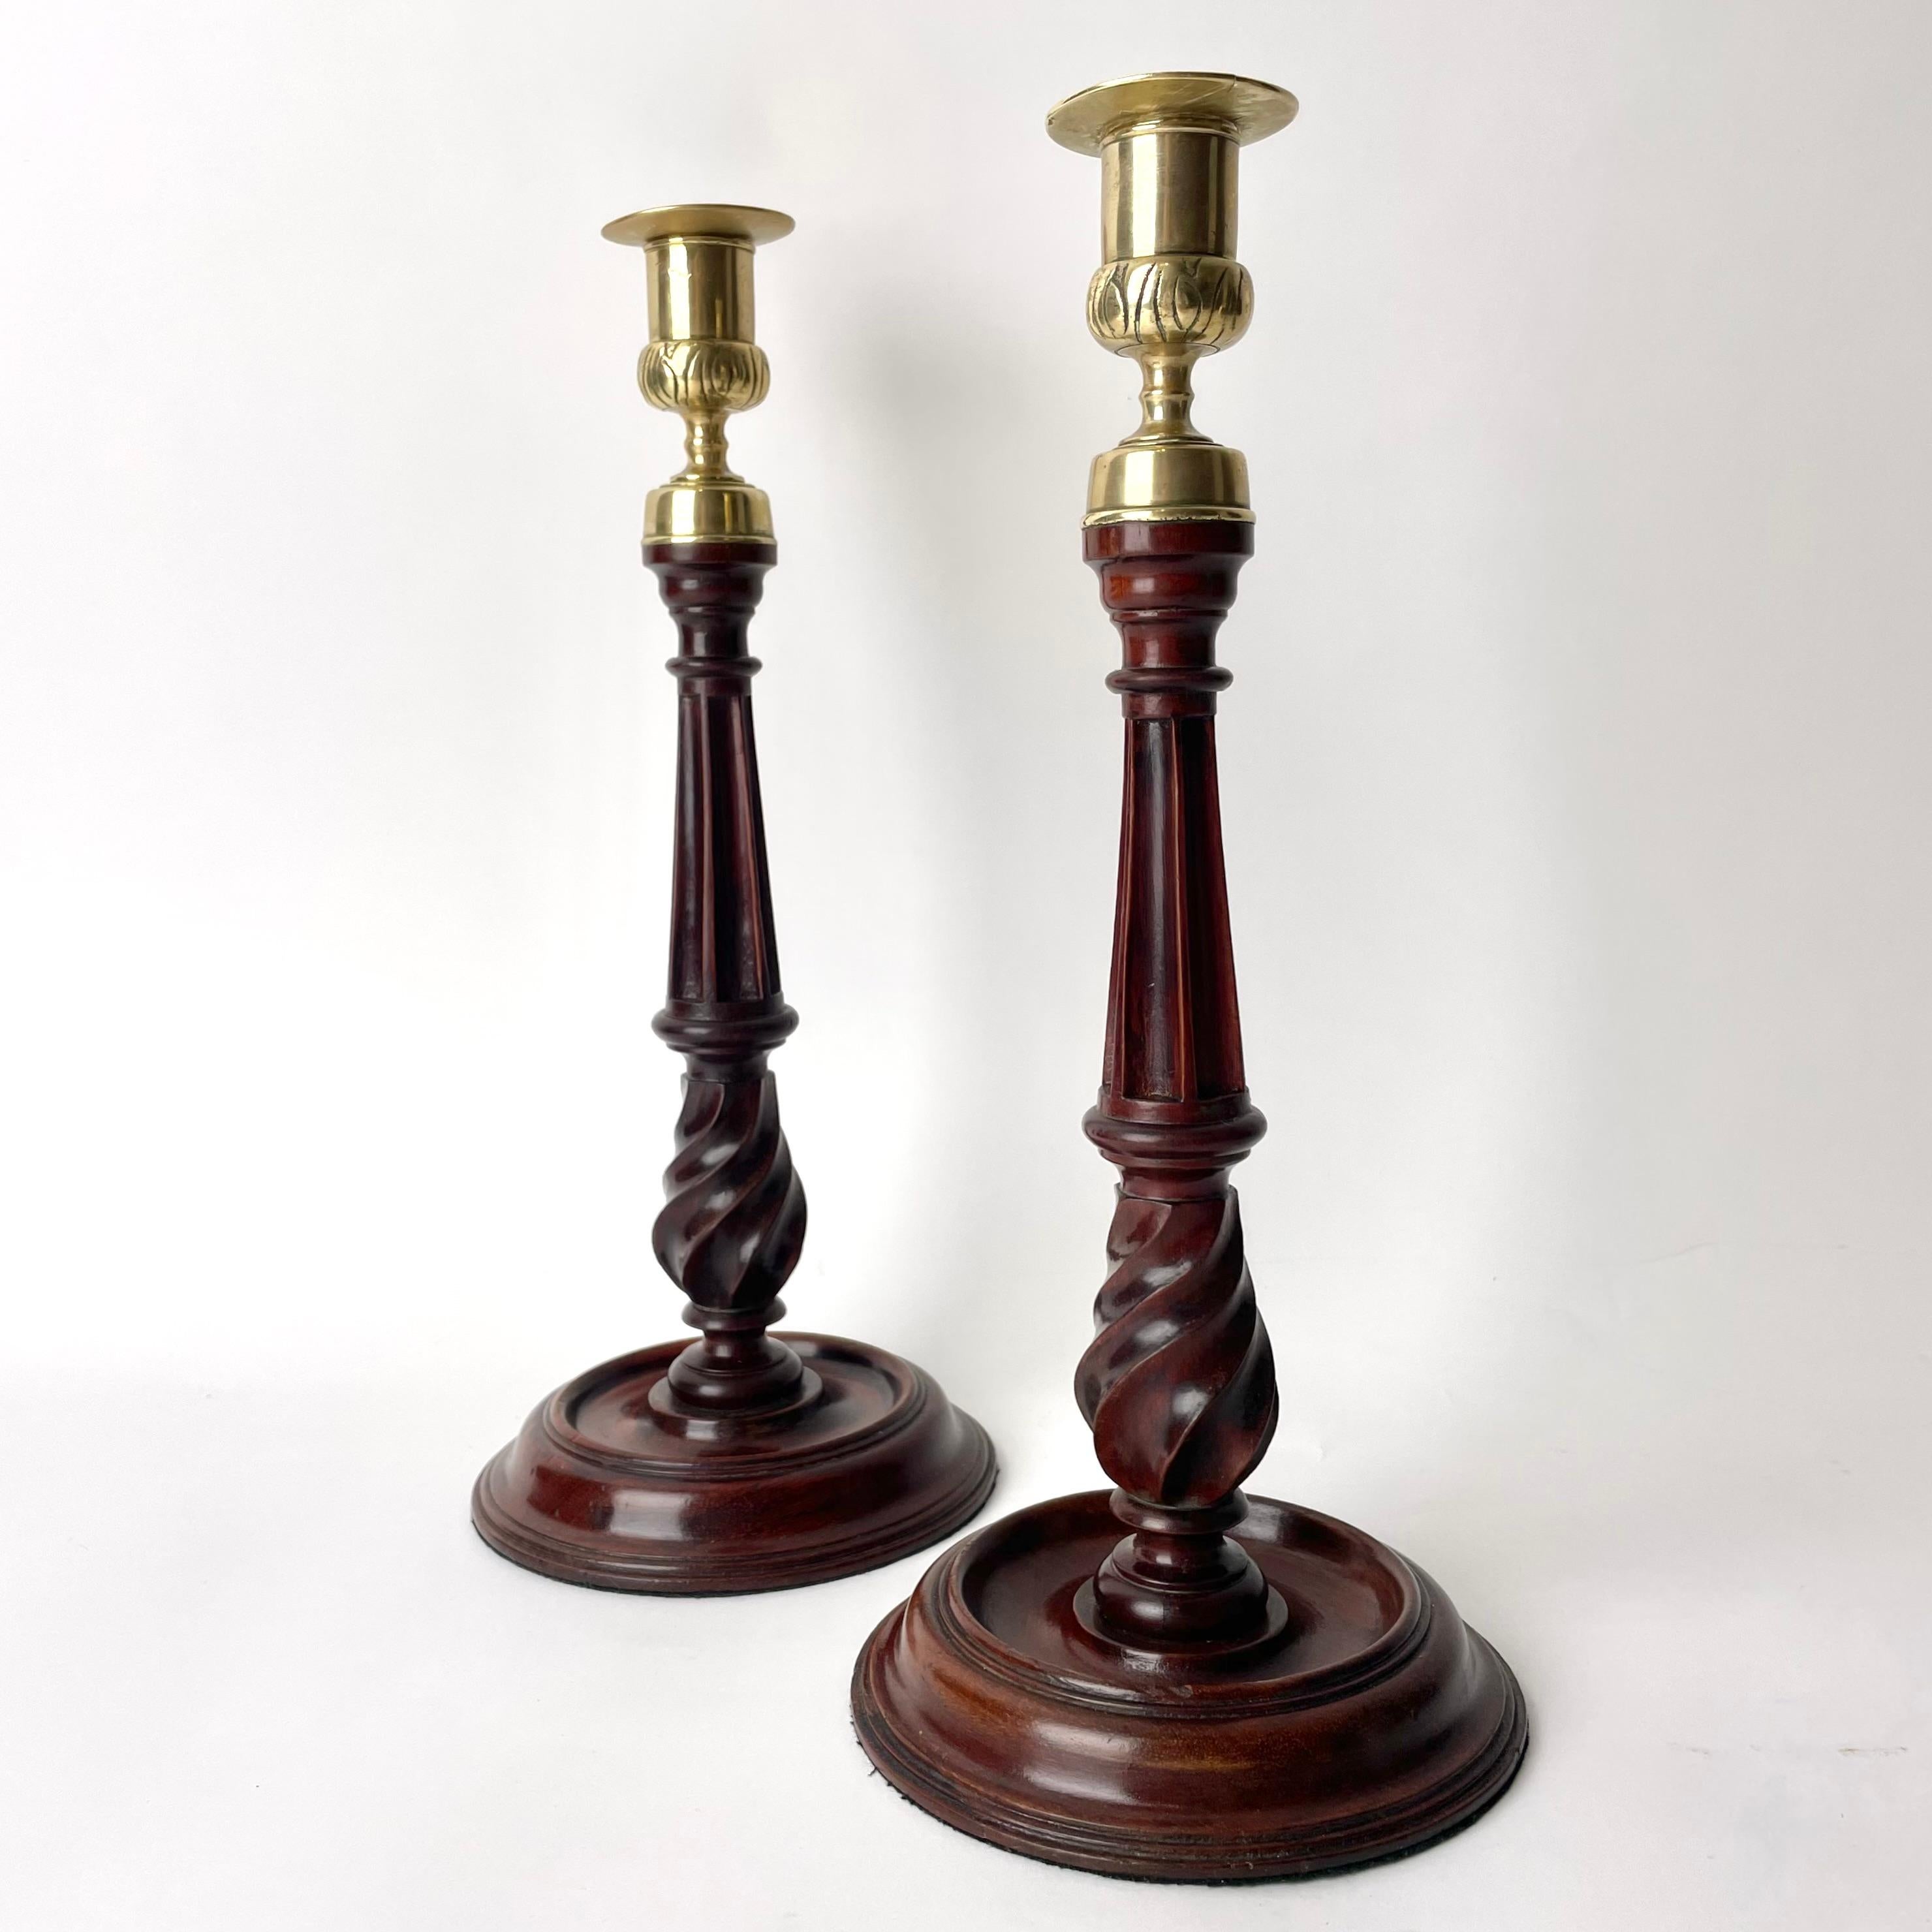 A Pair of Candlesticks in Mahogany (Swietenia mahagoni) and Brass. George III. Made in England during the late 18th century. 

Richly decorated and filled with rare and intricate detail, these candlesticks consist of a base and column in mahogny